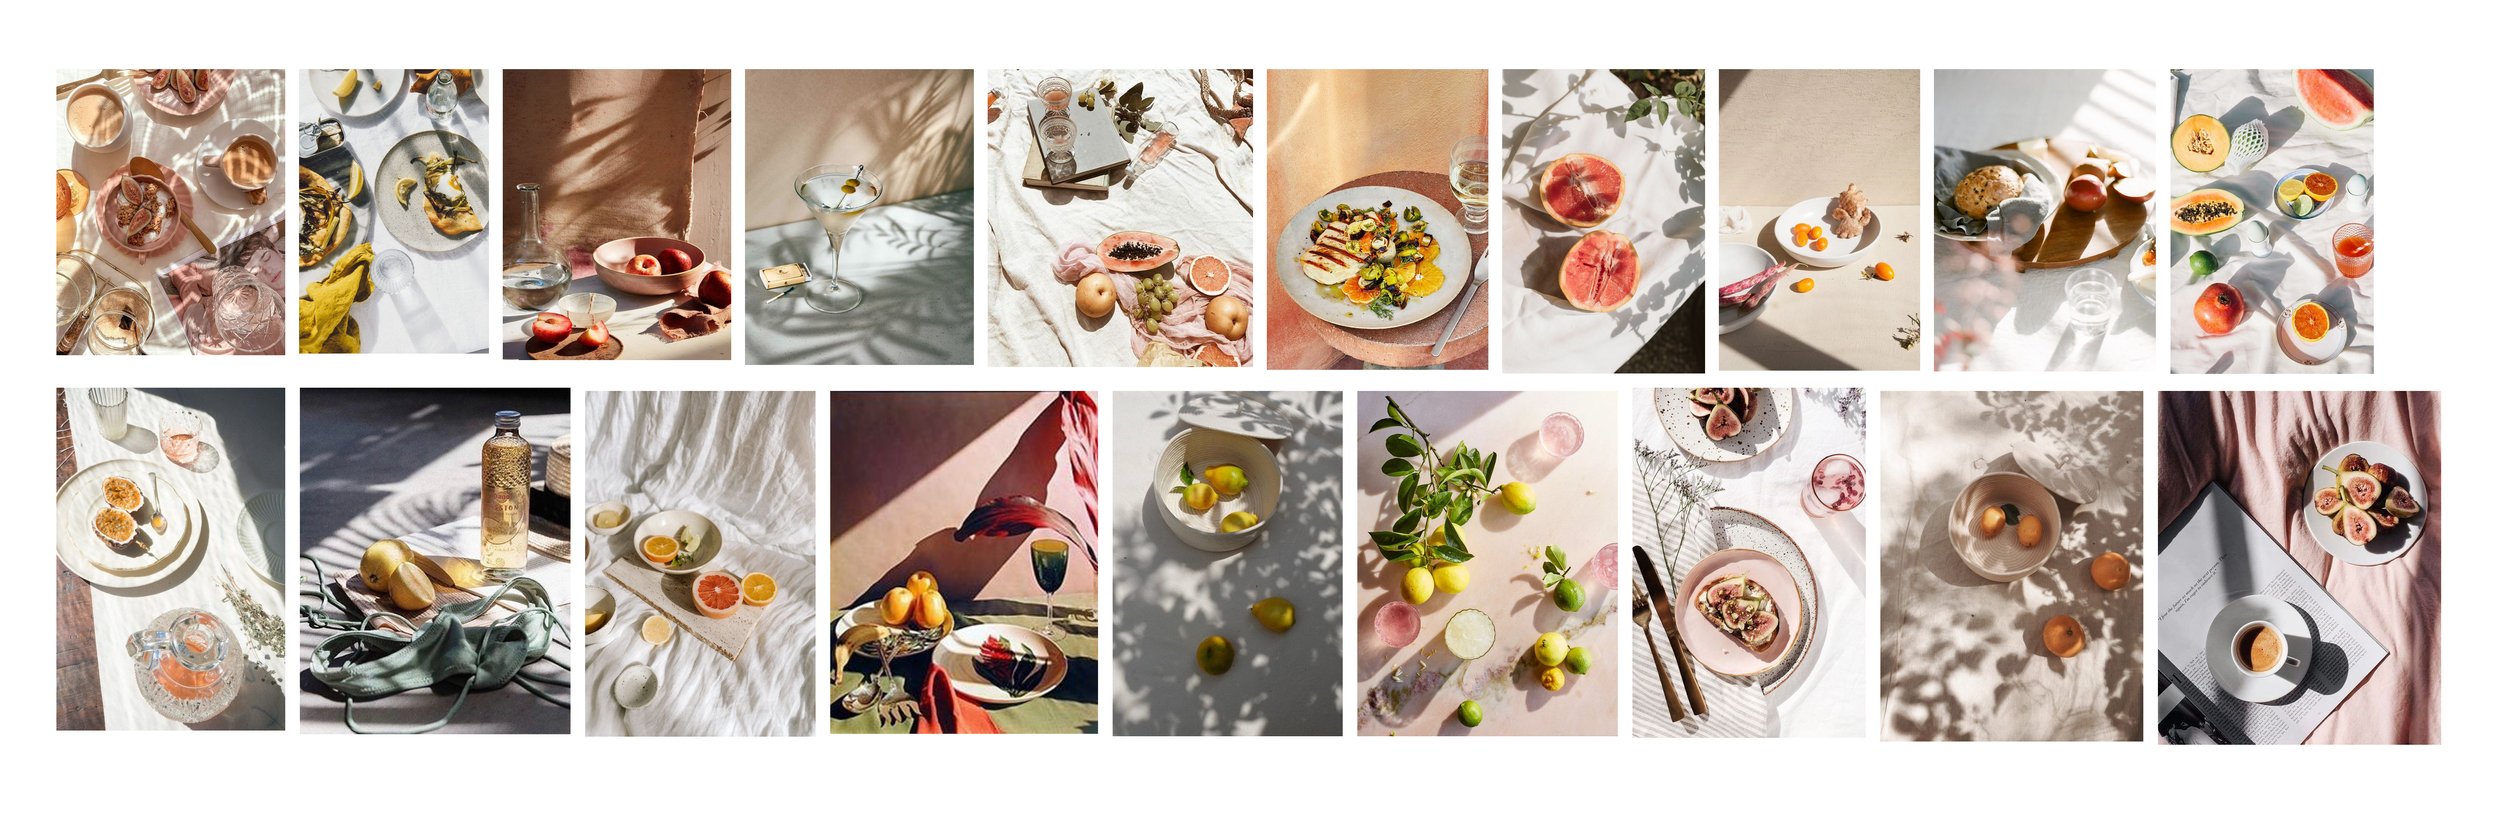 Moodboard: Food Feature- A Fresh Way To Eat